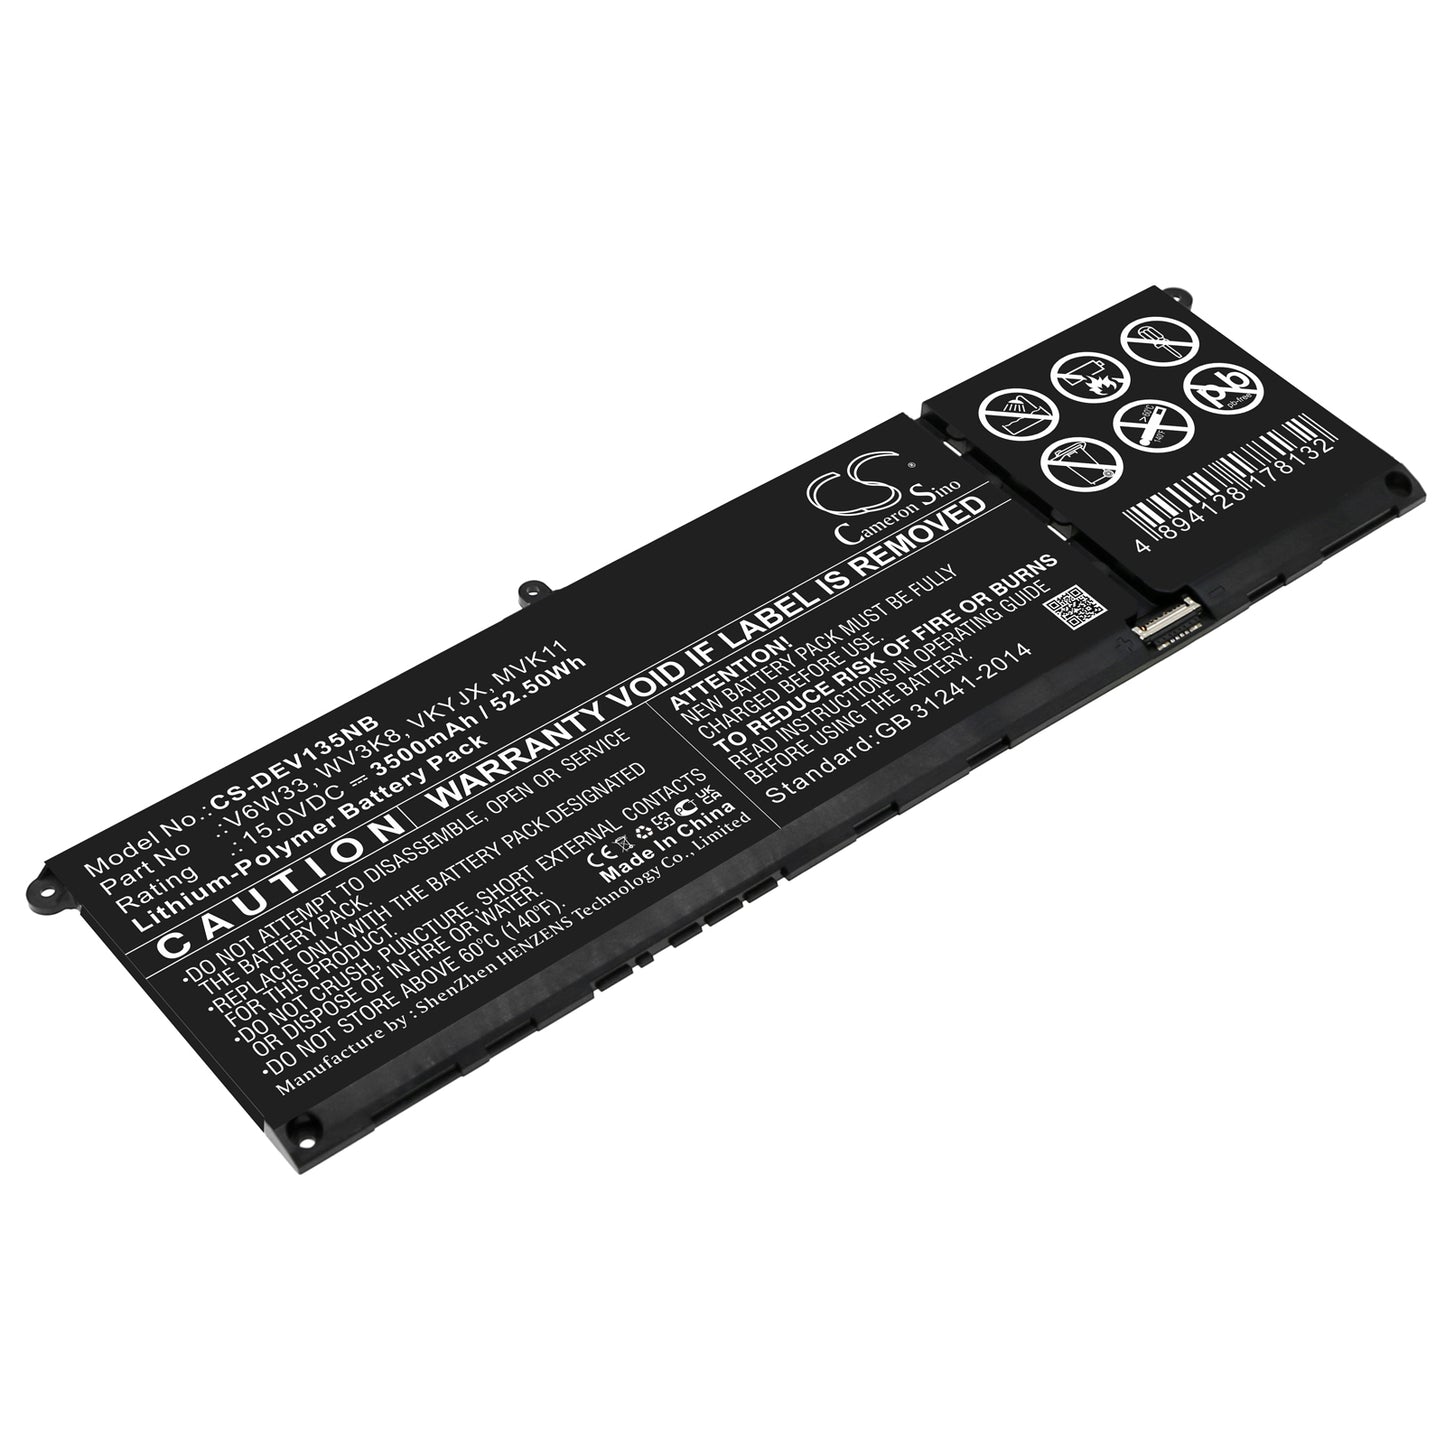 3500mAh Battery for Dell Inspiron 13 5310, Inspiron 14 5410, 5418, Inspiron 15 3510, 3511, 3515, 5510, 5518, Inspiron 5415, 5515, Latitude 3320, 3420, 3520, Vostro 14 5410, Vostro 15 3510, 3511, 3515, 5510, Vostro 5415, 5510, 5515-SMAVtronics